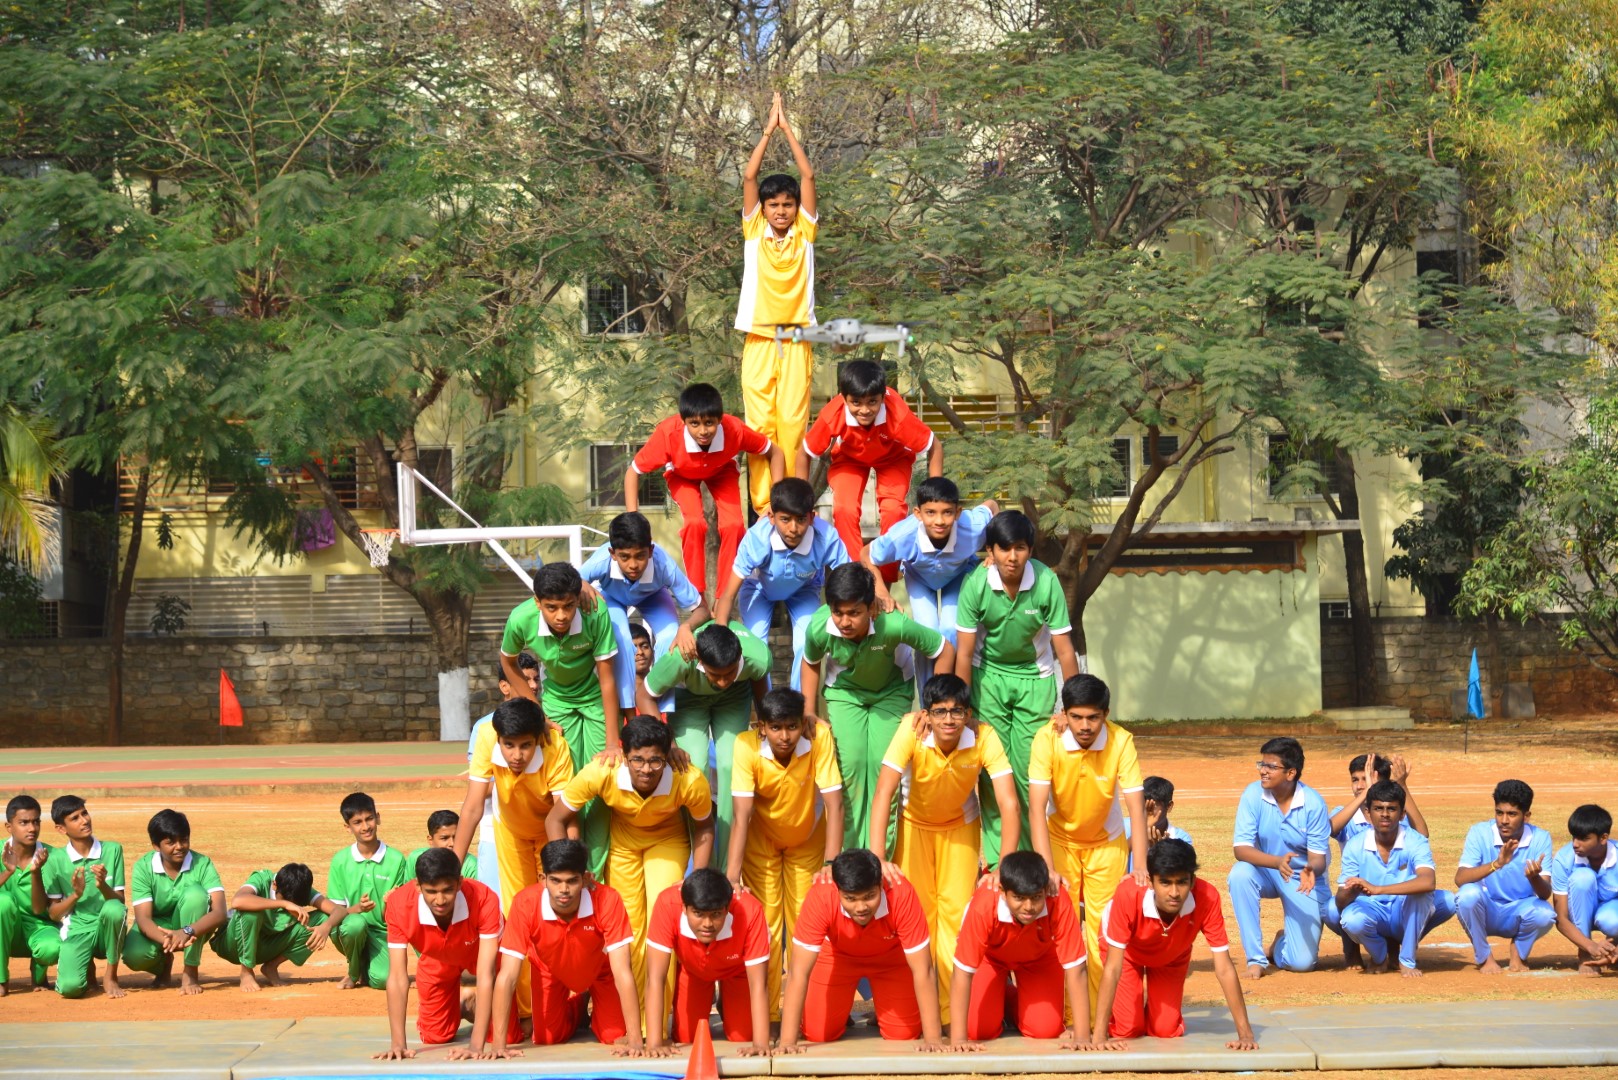 A group of students from Bethesda International School in Bangalore forms a human pyramid during Sports Day, showcasing teamwork and athleticism.